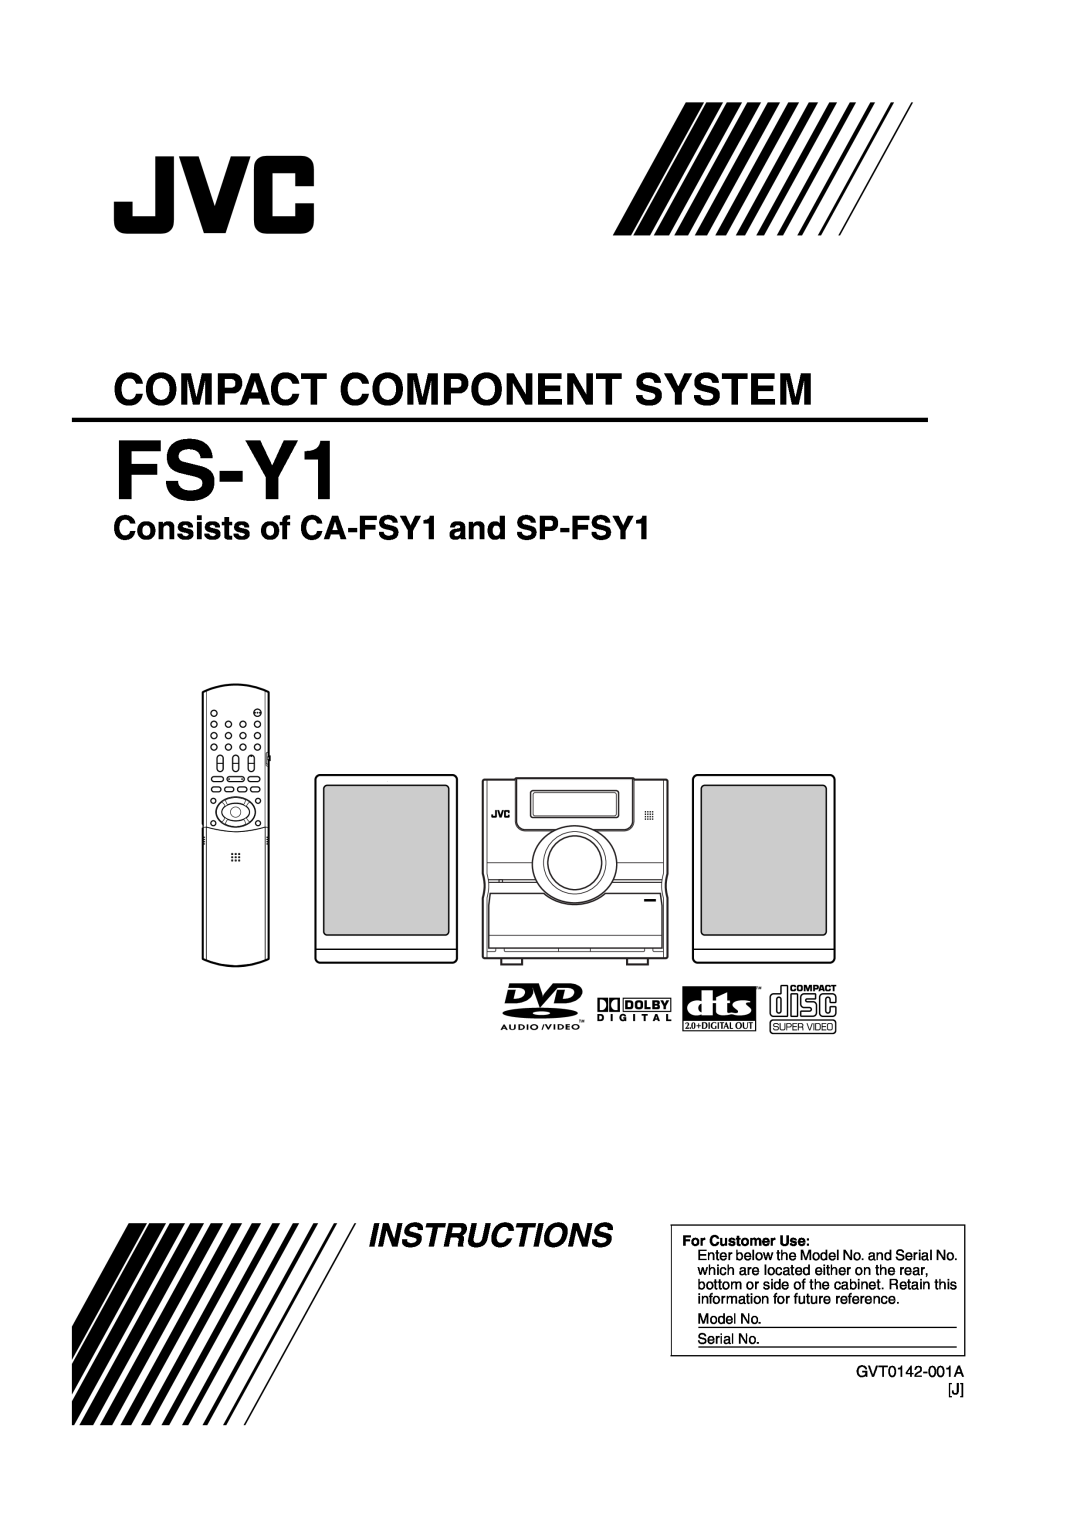 JVC GVT0142-001A manual Compact Component System, Consists of CA-FSY1and SP-FSY1, Instructions, FS-Y1 